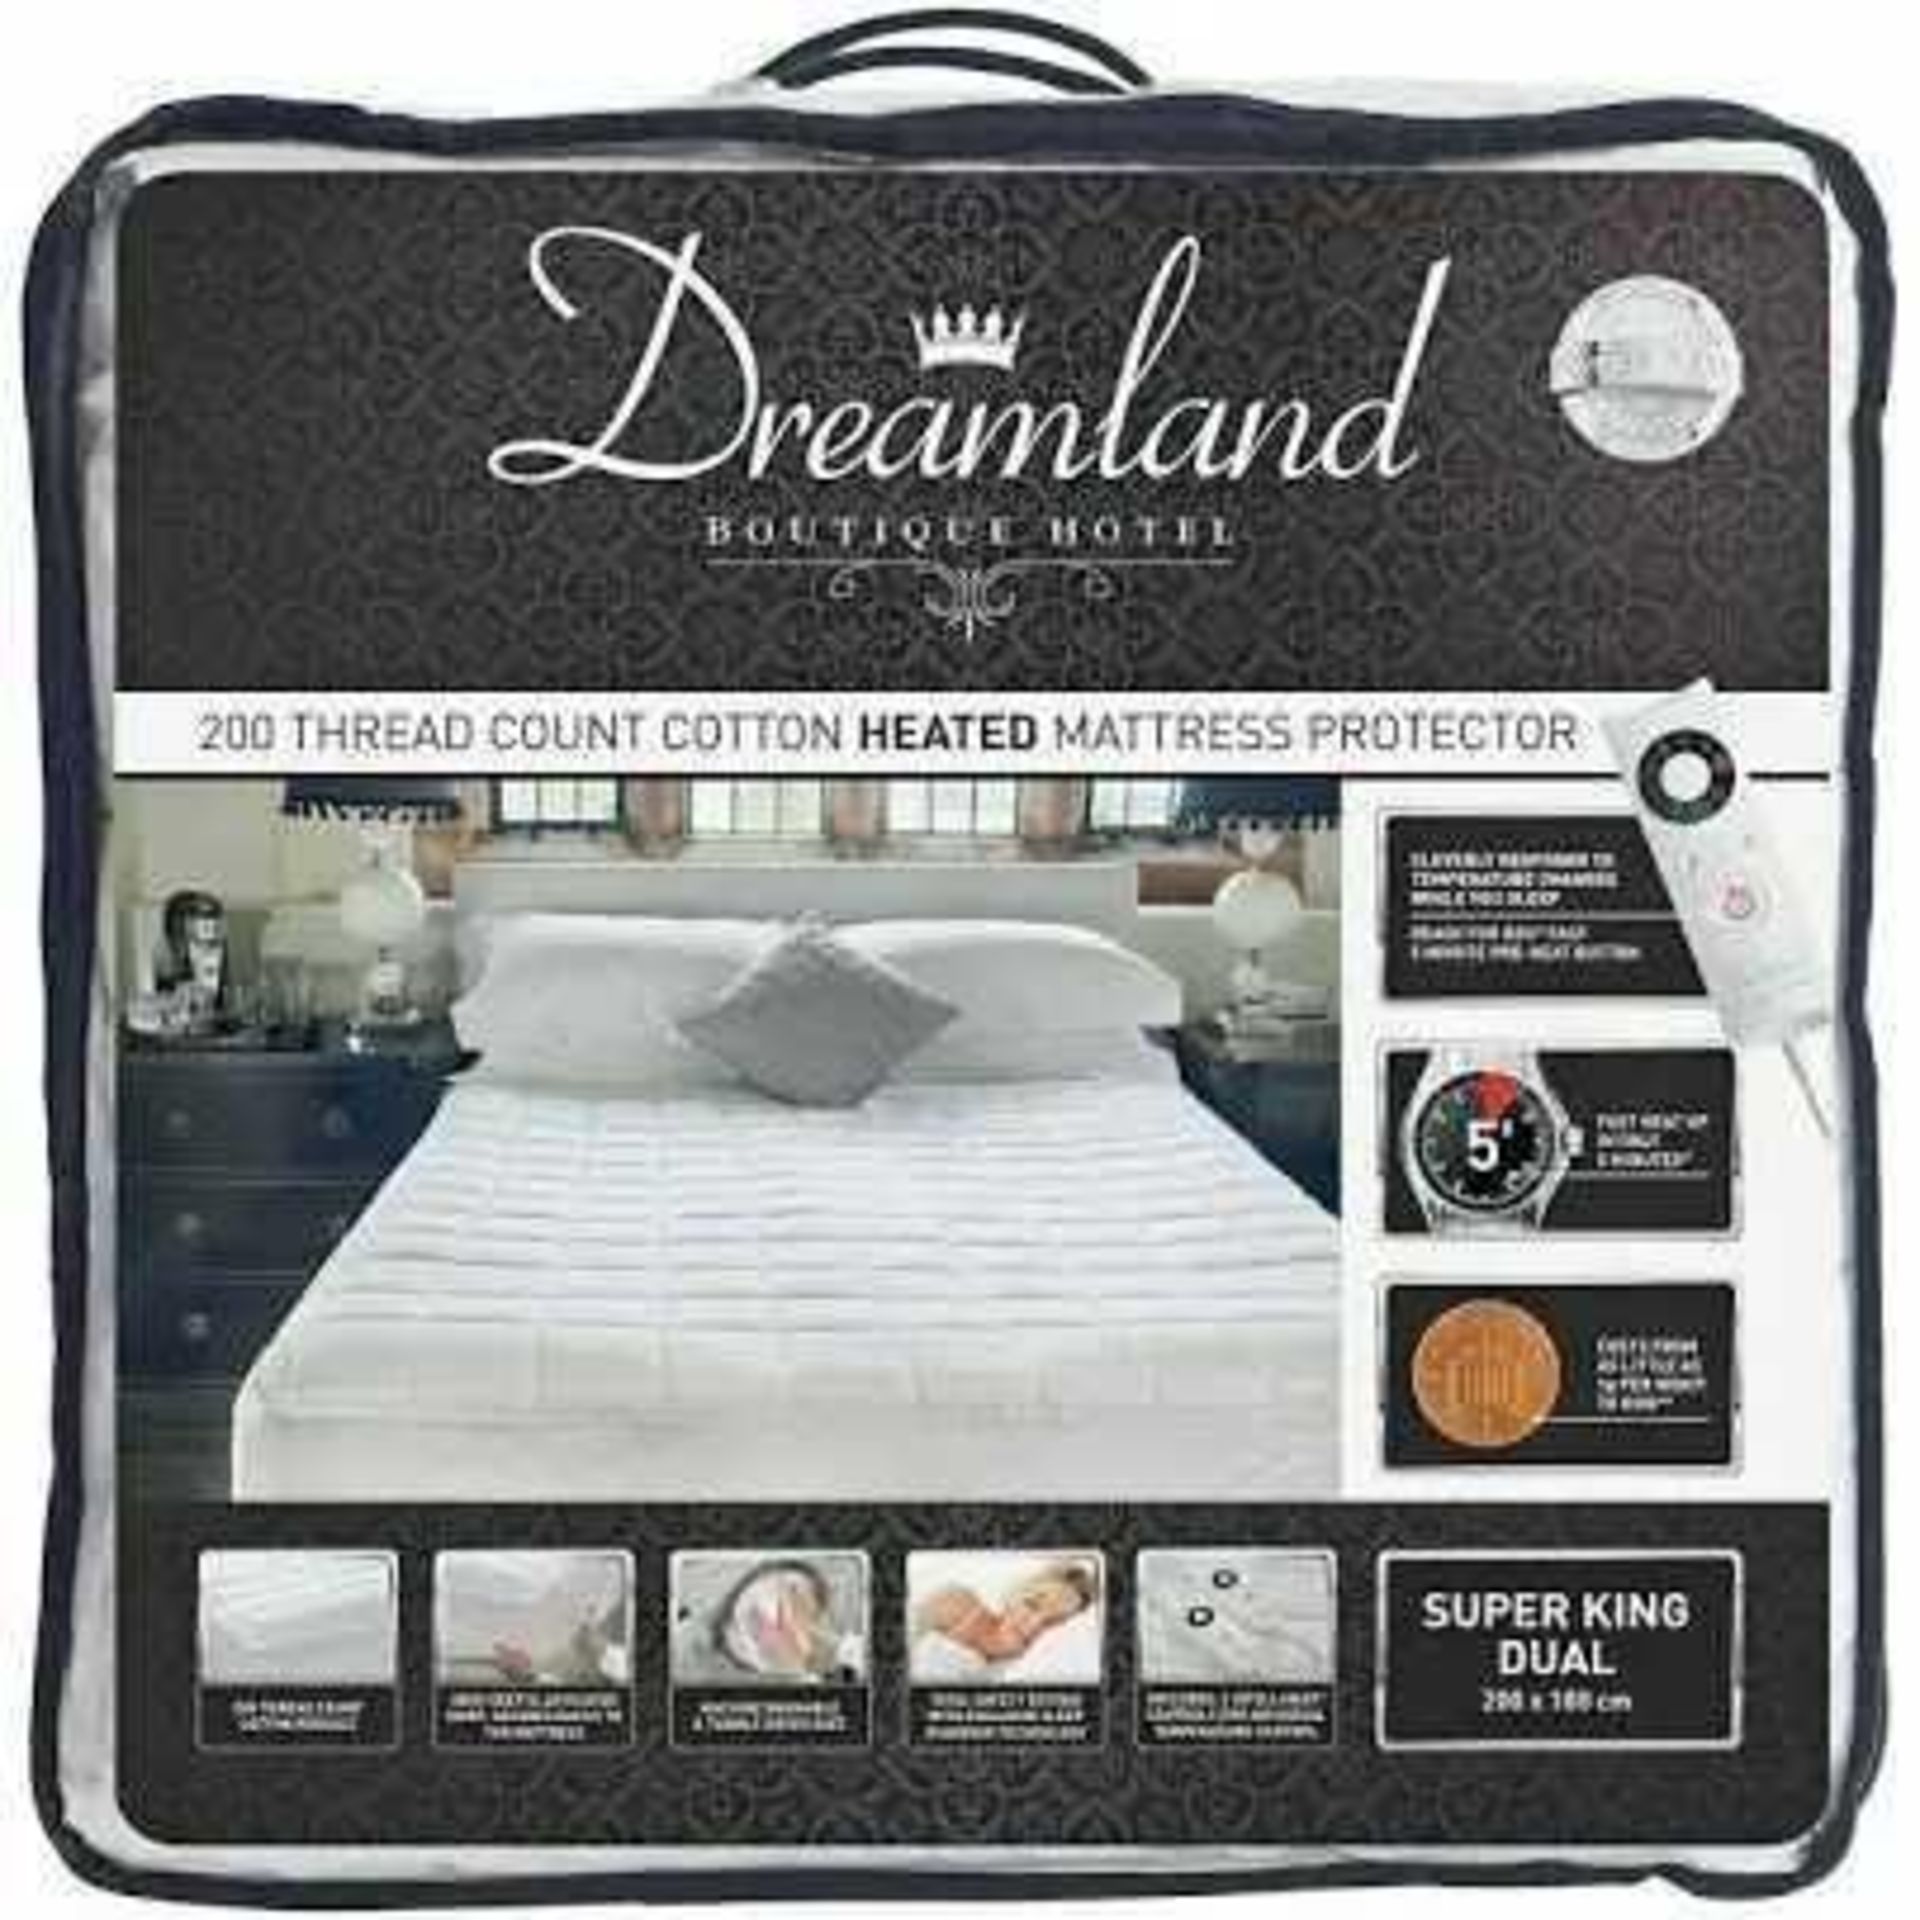 RRP £80 Bagged Dreamland Cotton Heated Mattress - Image 2 of 4